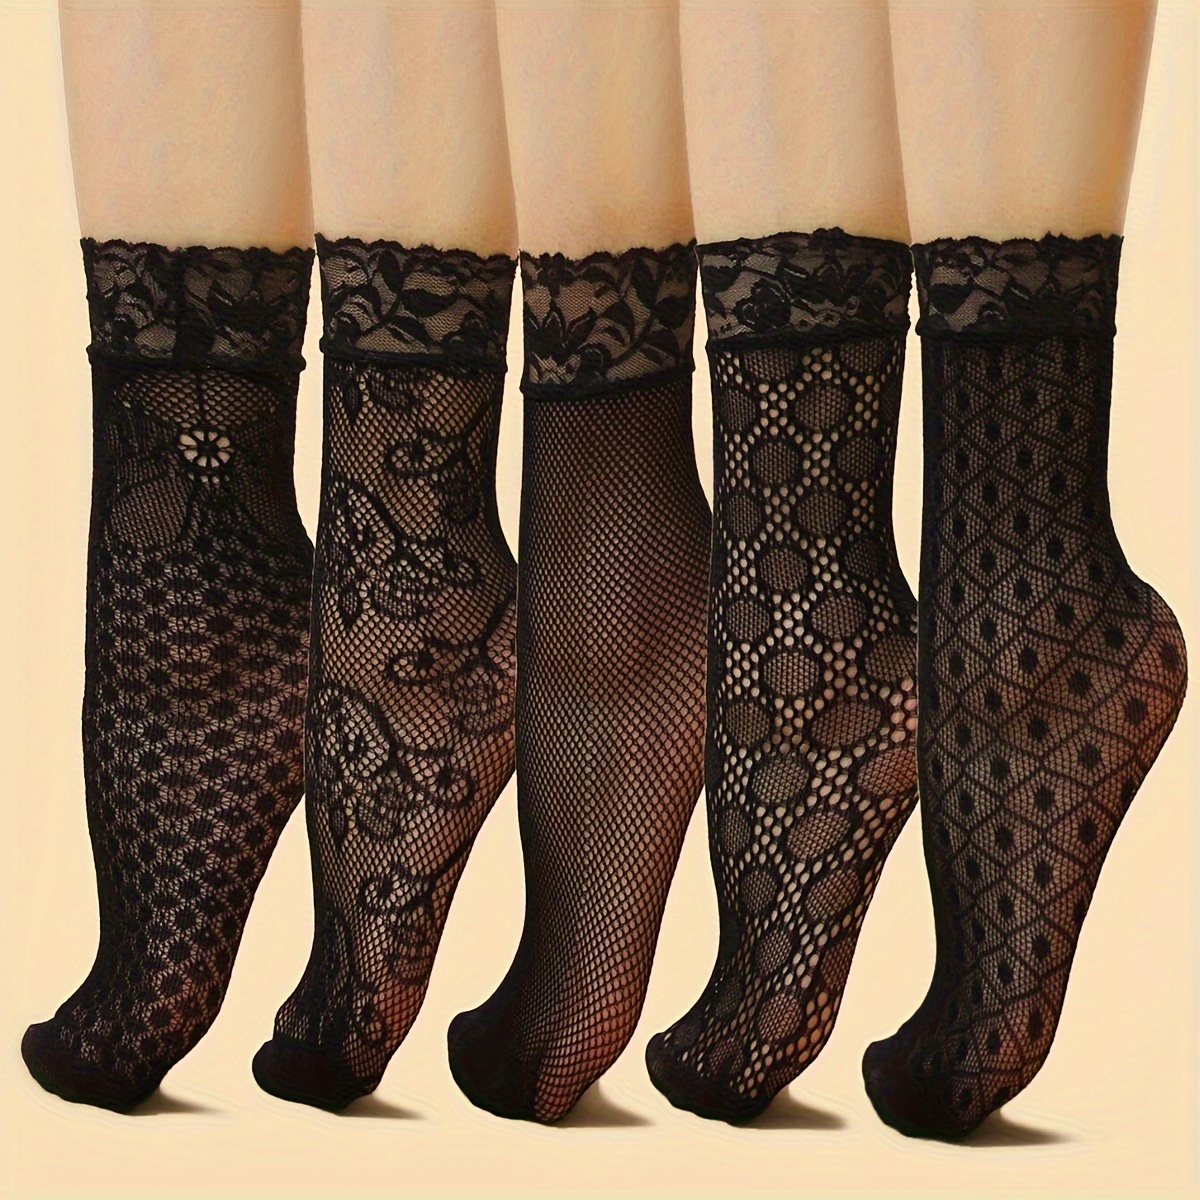 

5 Pairs Fashion Thin Floral Lace Socks, Comfy & Breathable Short Socks, Women's Stockings & Hosiery